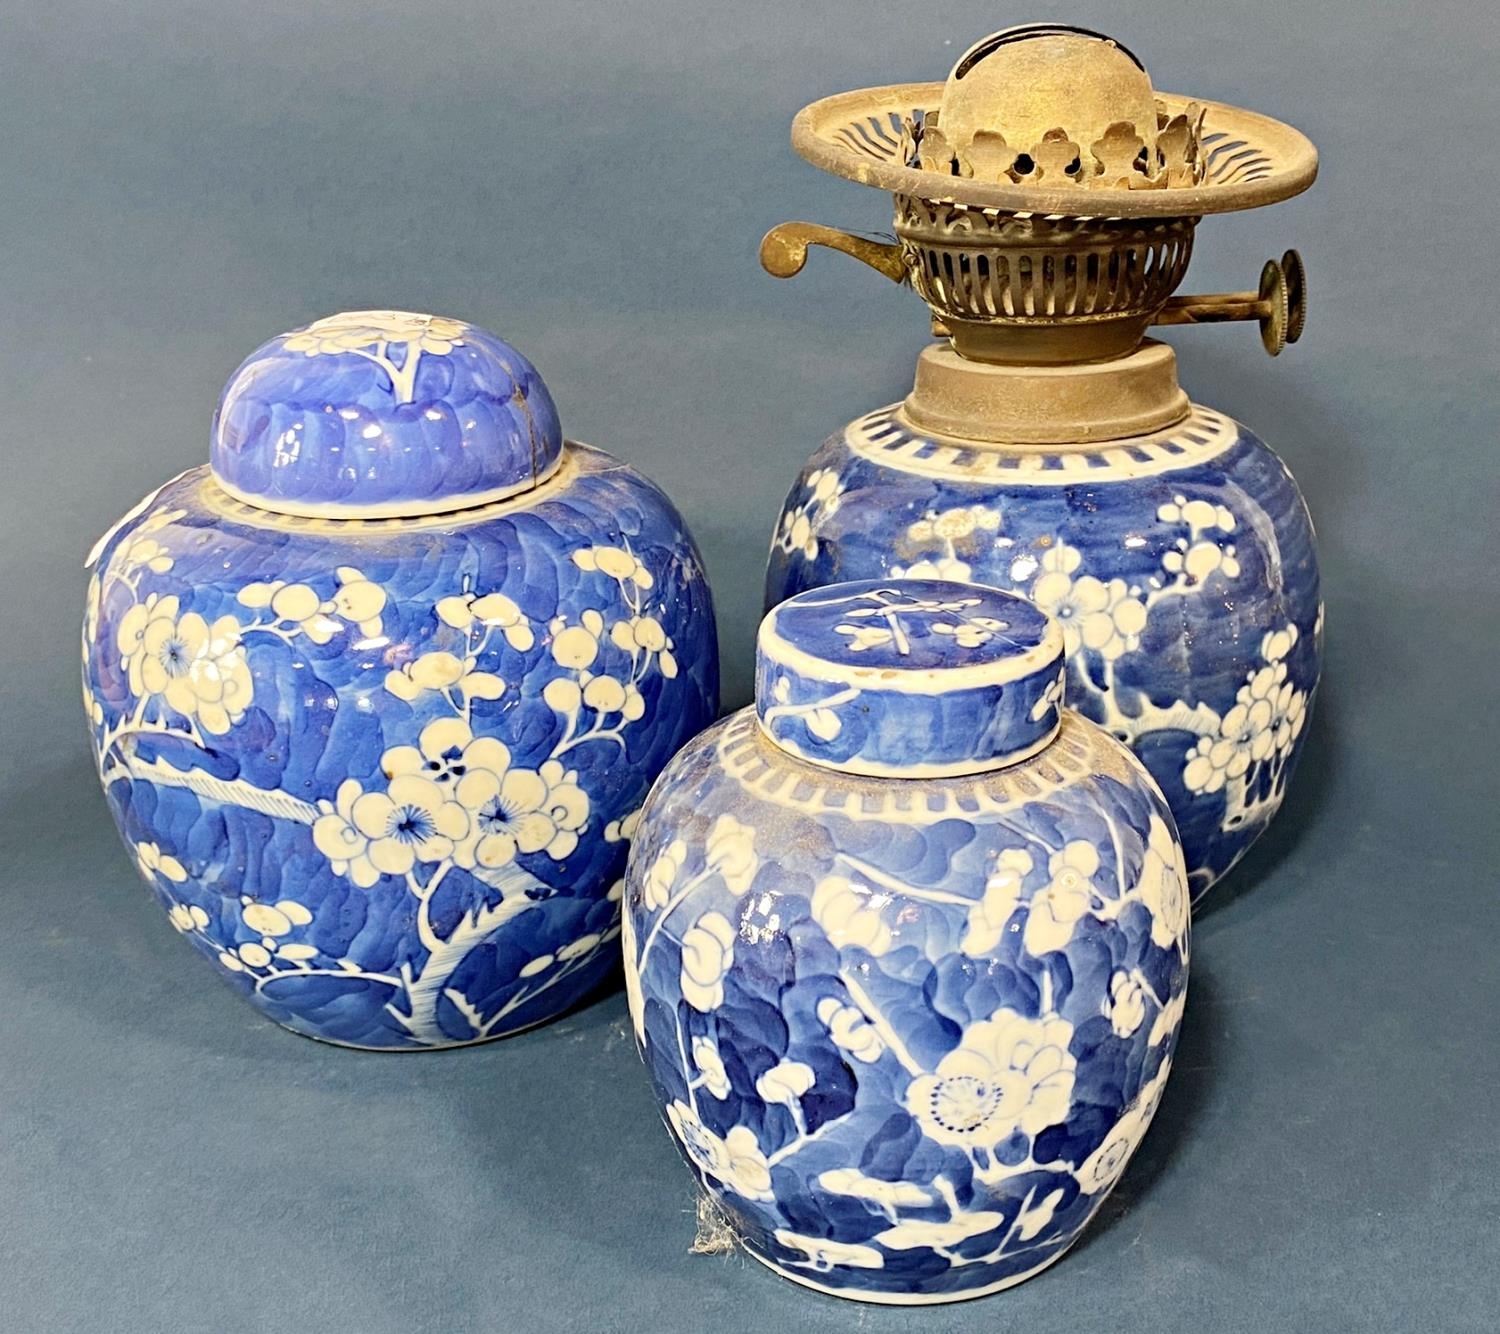 Three Chinese blue and white porcelain prunus jars with covers, one with oil lamp conversion, four-